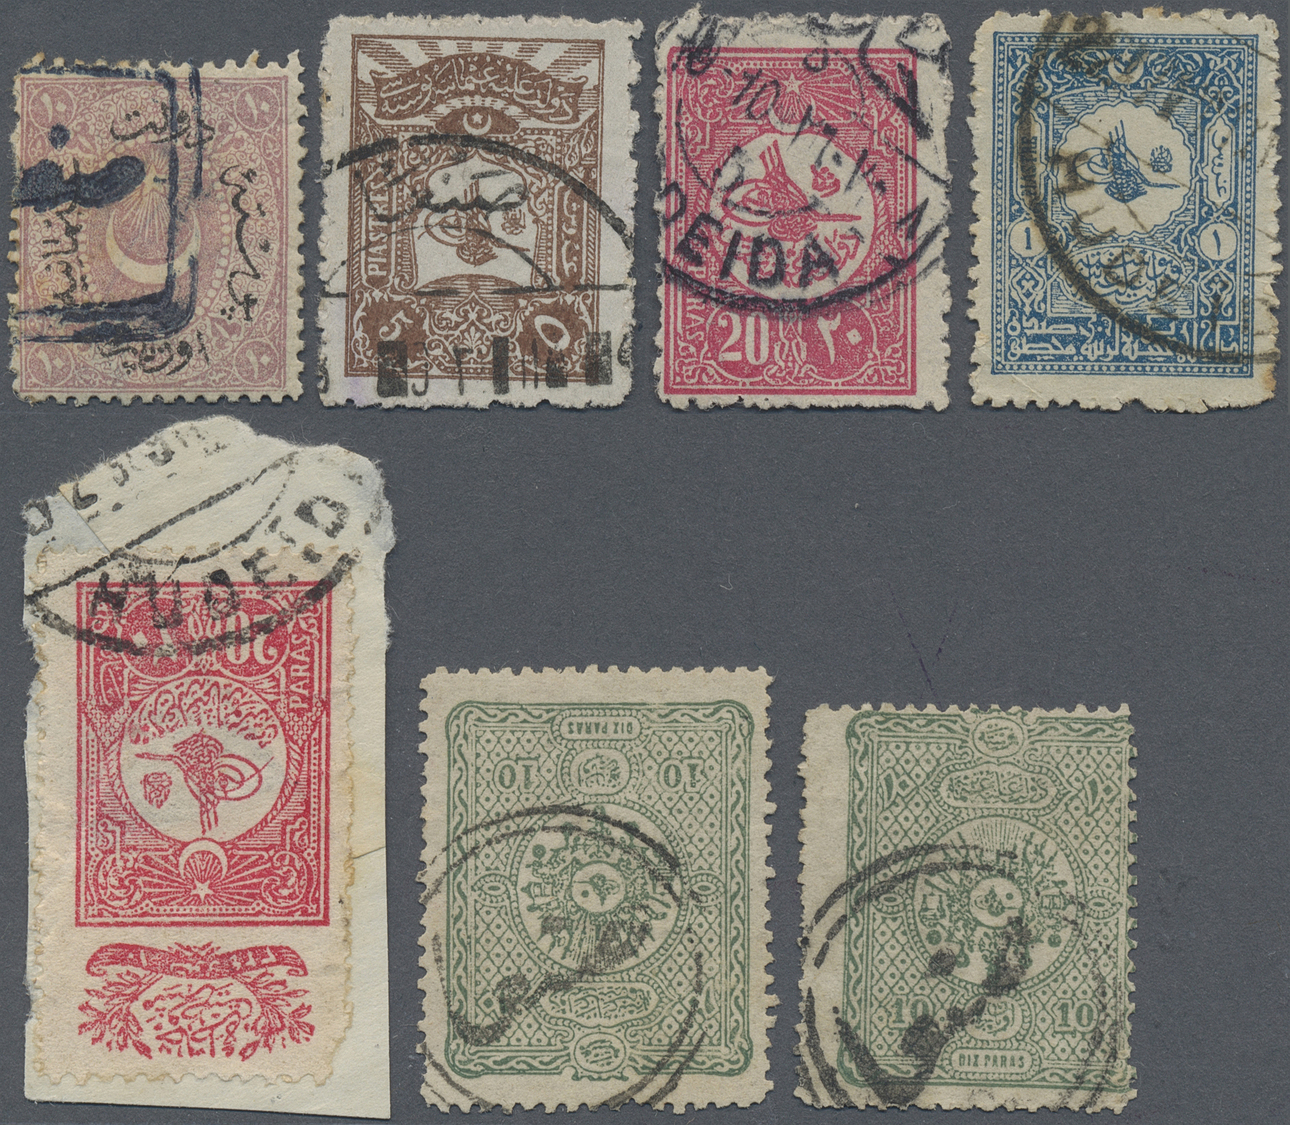 /O Jemen: 1875-1909, Türkish Cancellations On Classic Issues Including SANAA Box Type And Double Circle, Hodeida And Hod - Yémen